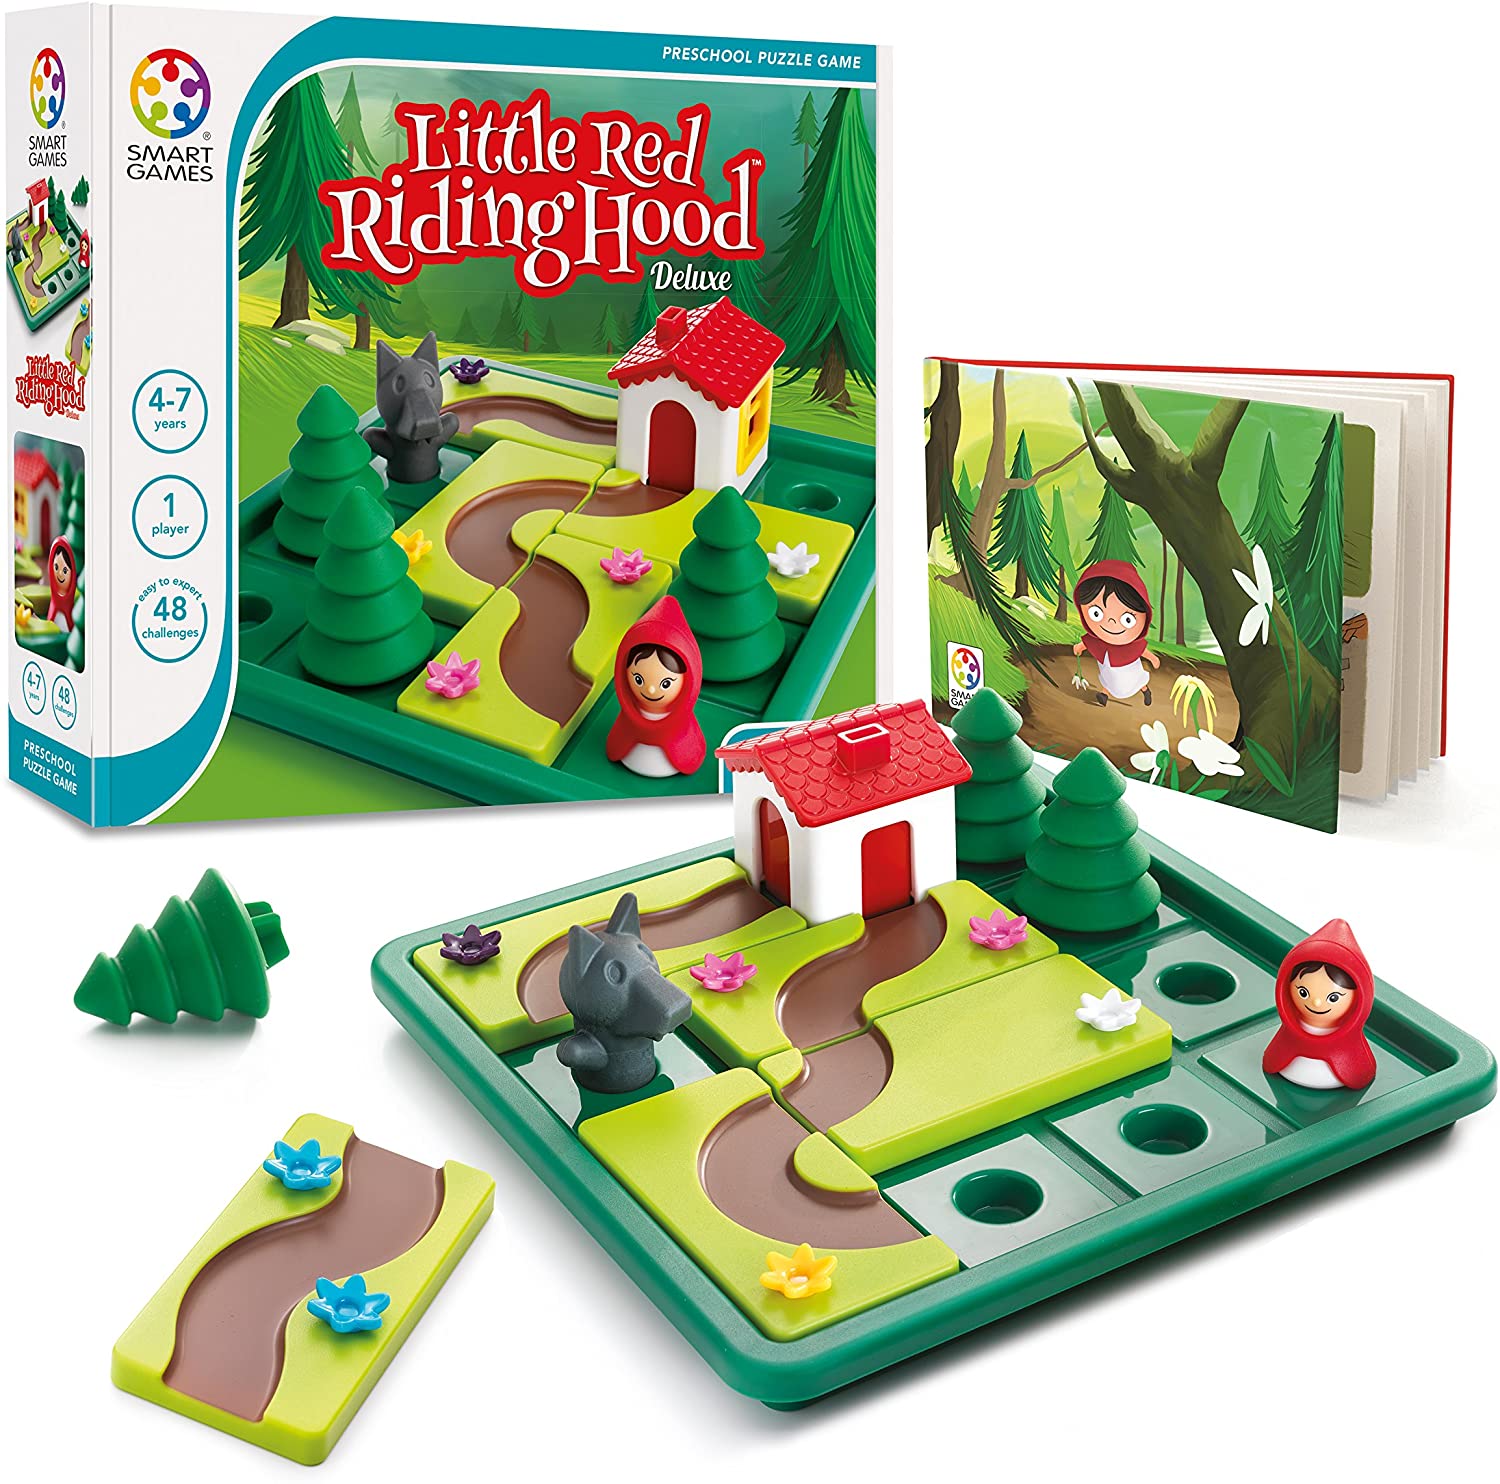 Smart Games Smartgames Sg 021 – Little Red Riding Hood